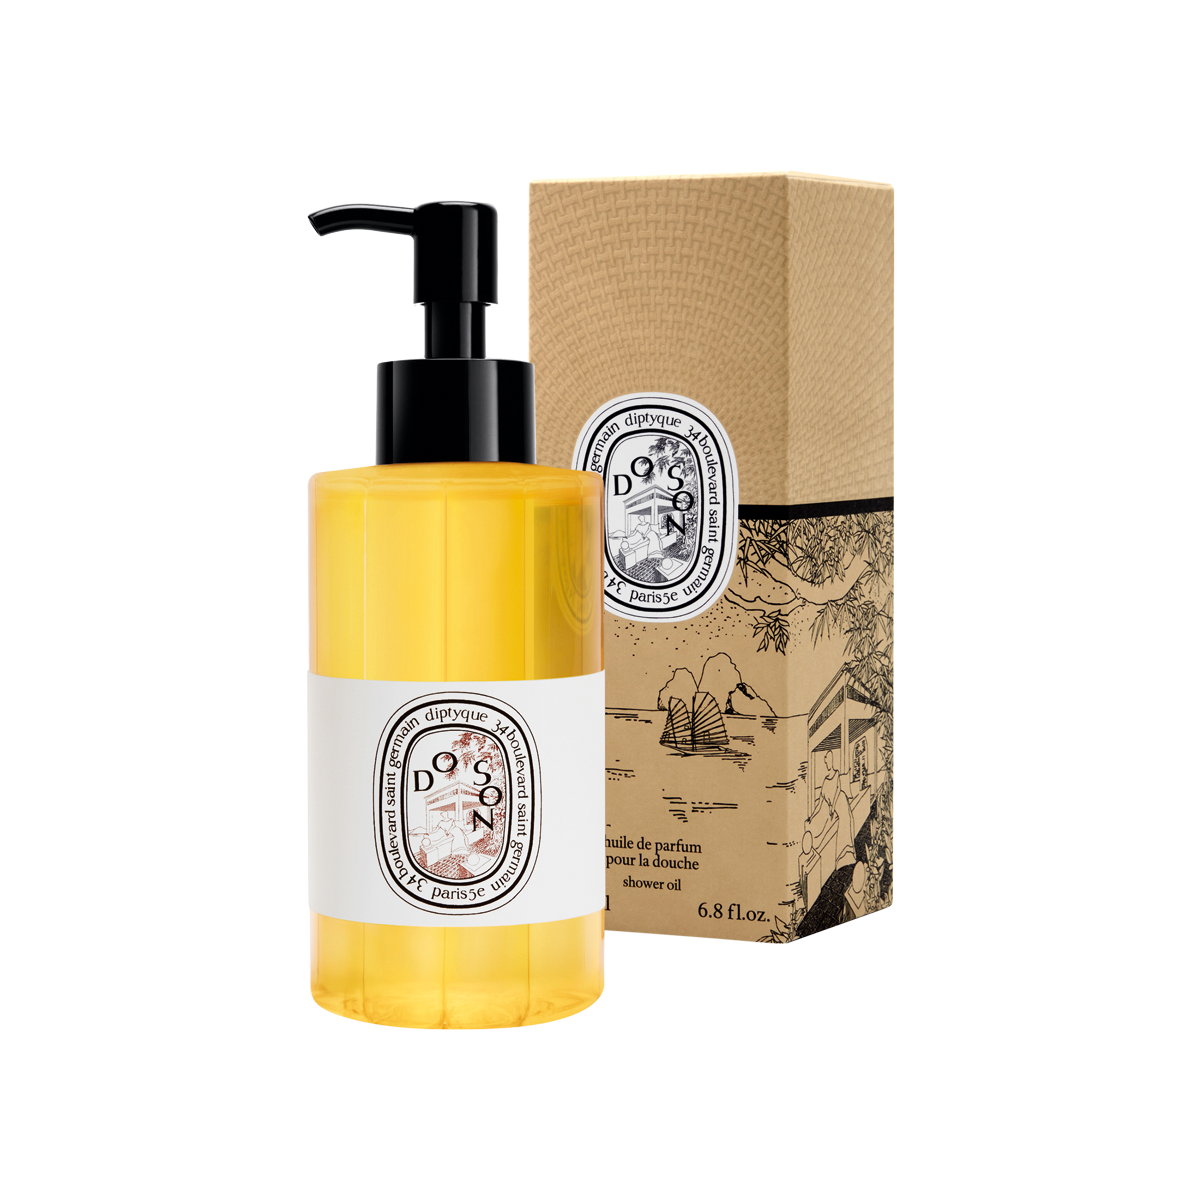 Diptyque - Do Son Shower Oil Limited